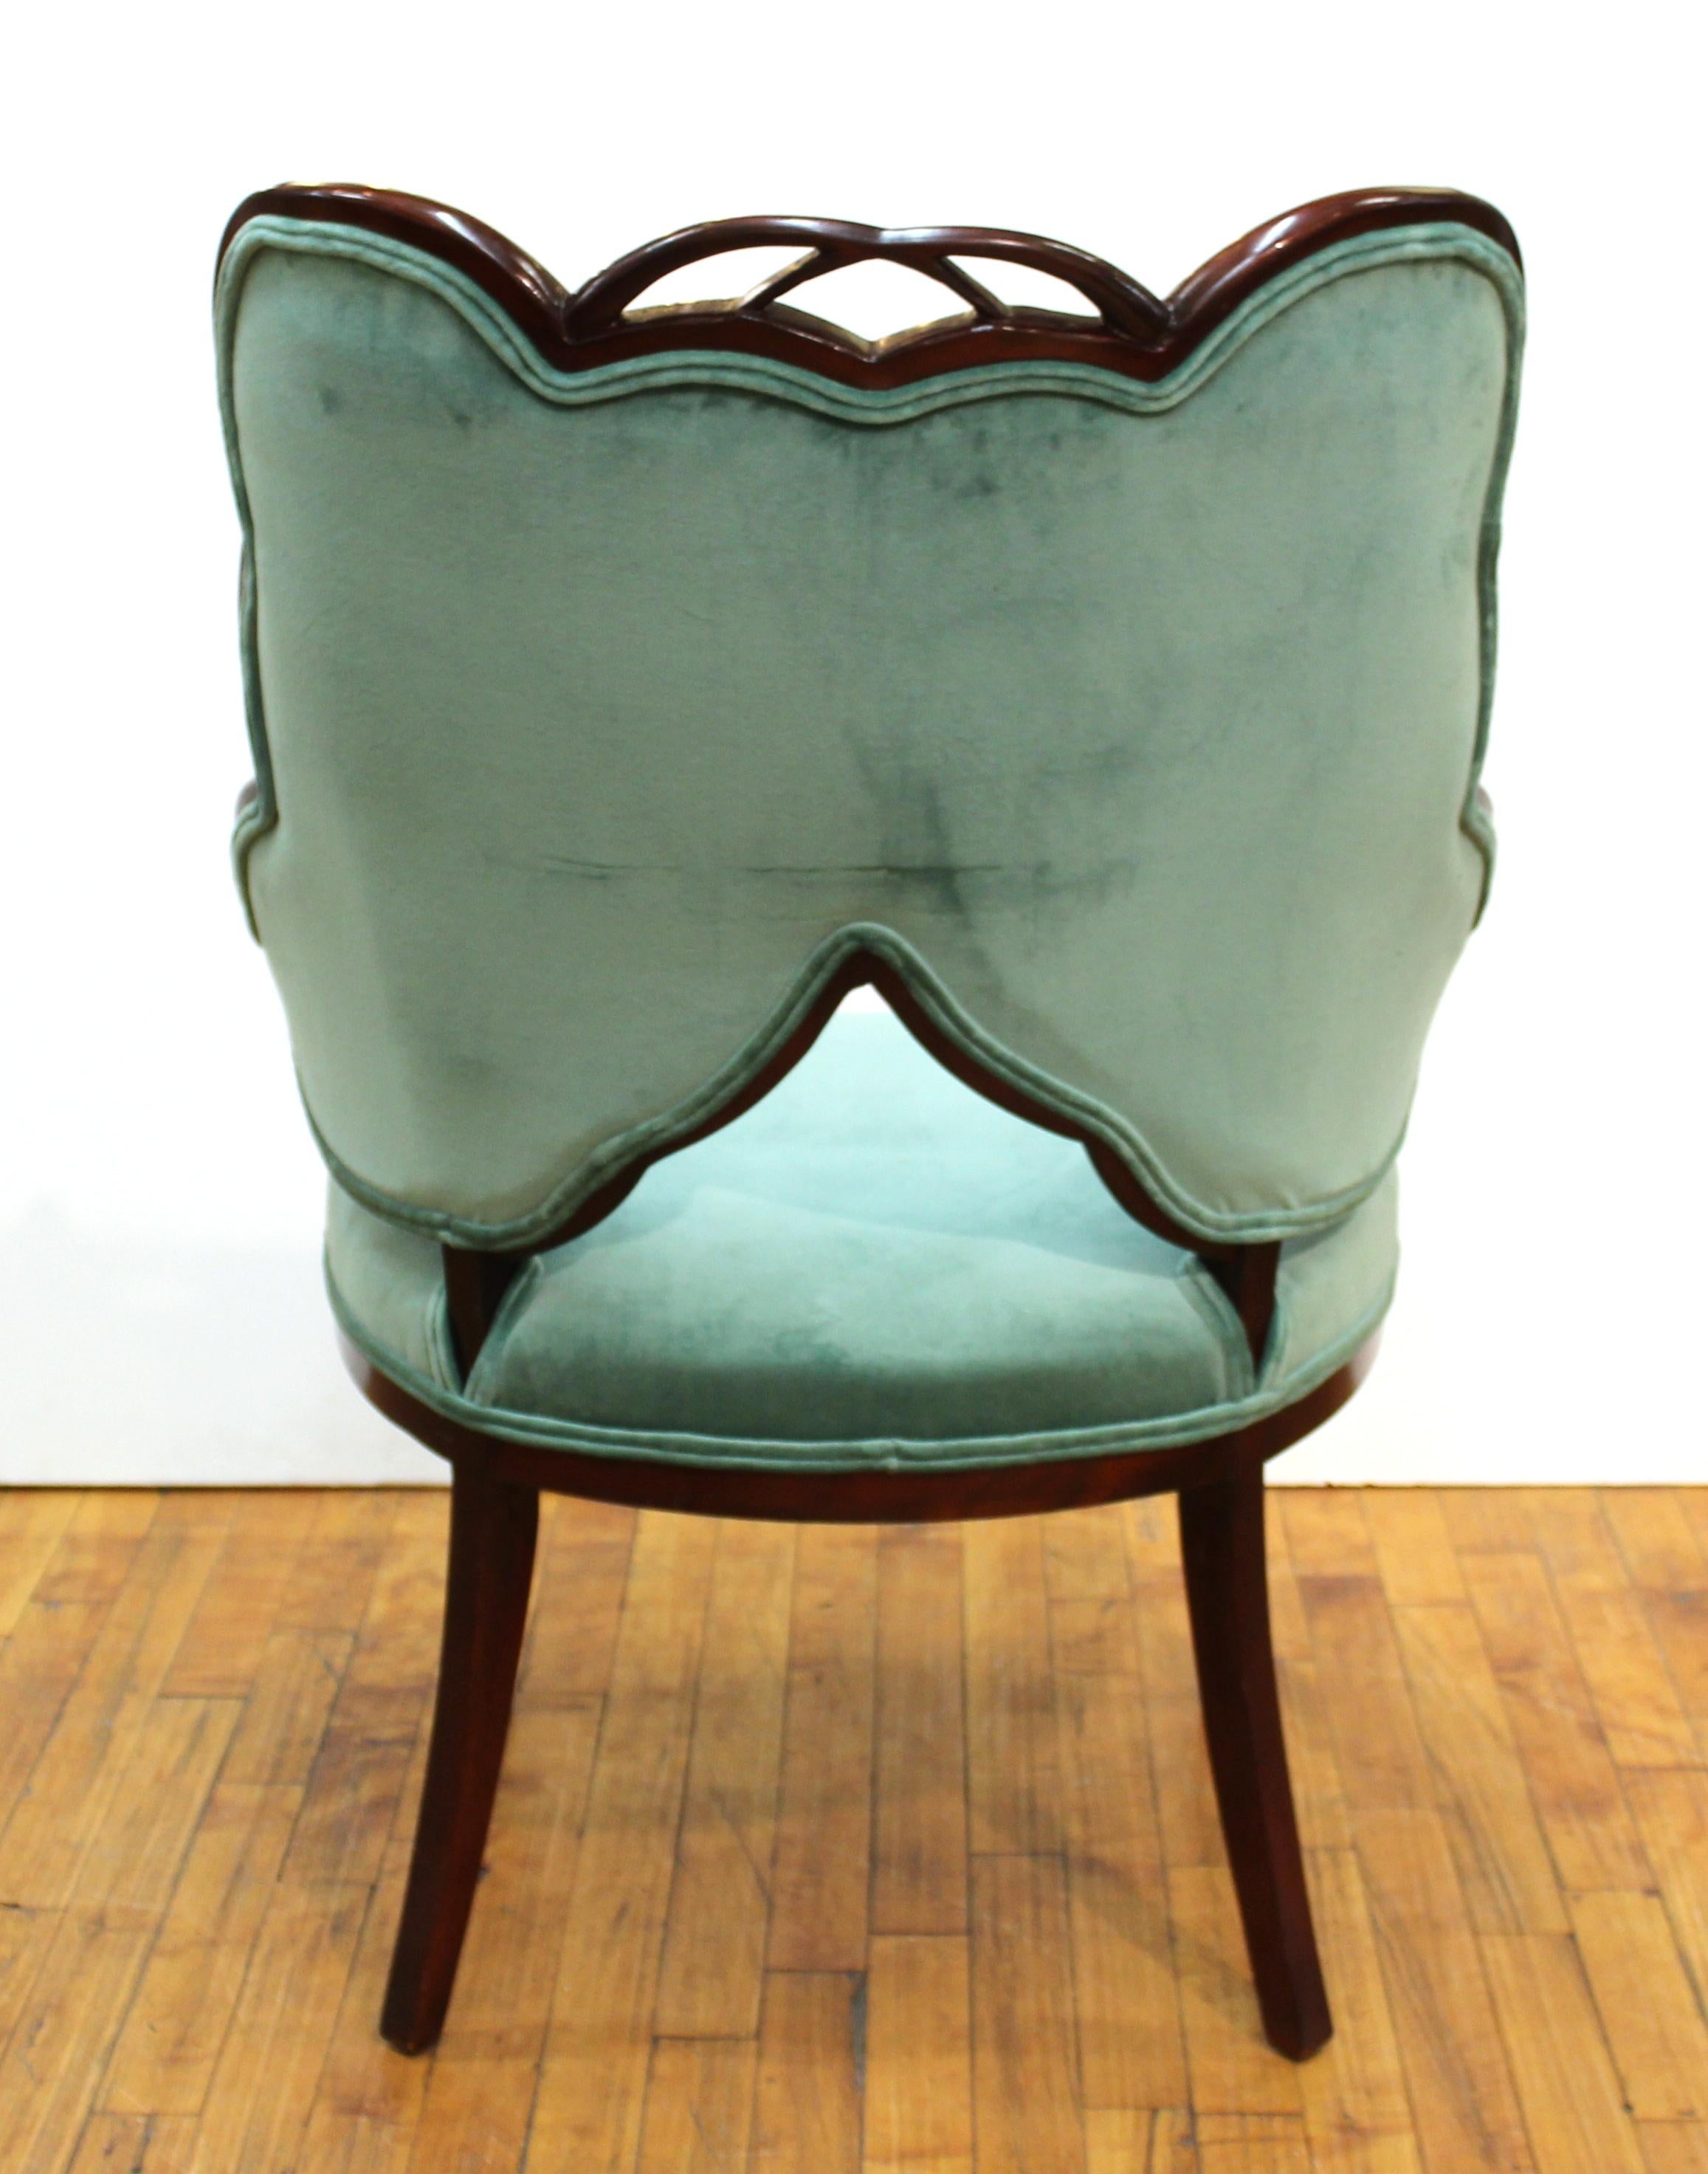 French Art Deco Mahogany Chairs in Jade Green Velvet with Leaf Design 3